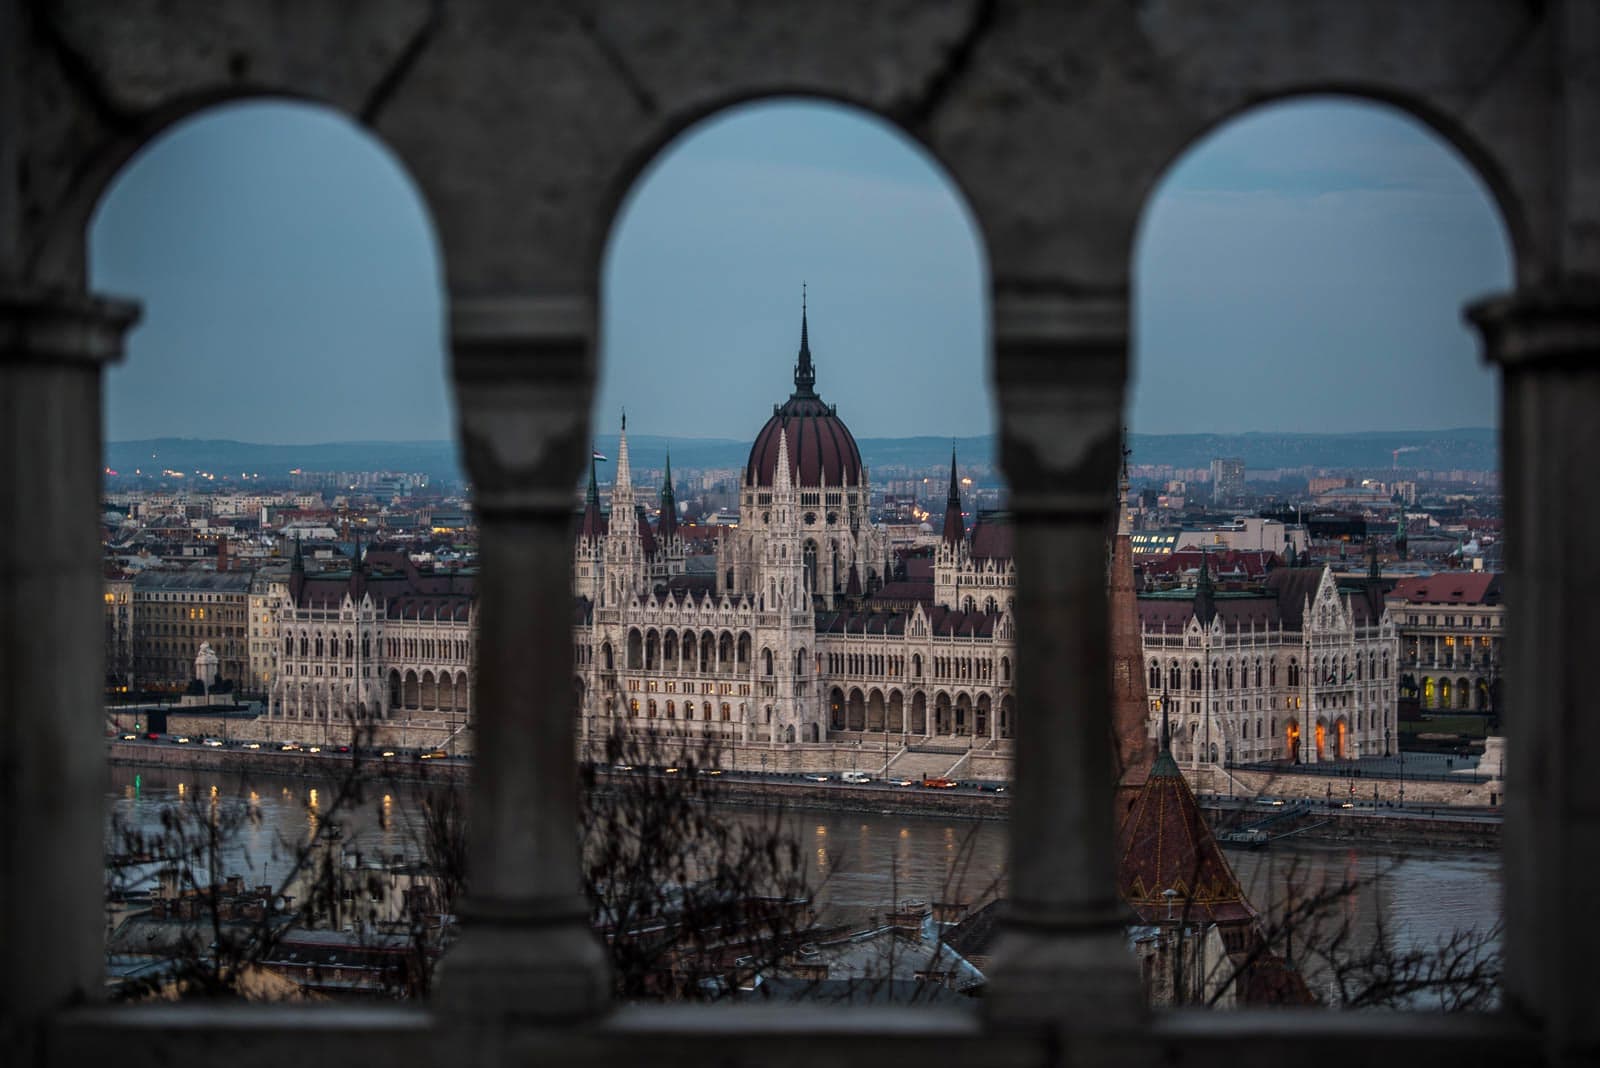 A view of the hungarian parliament building from an arched window.